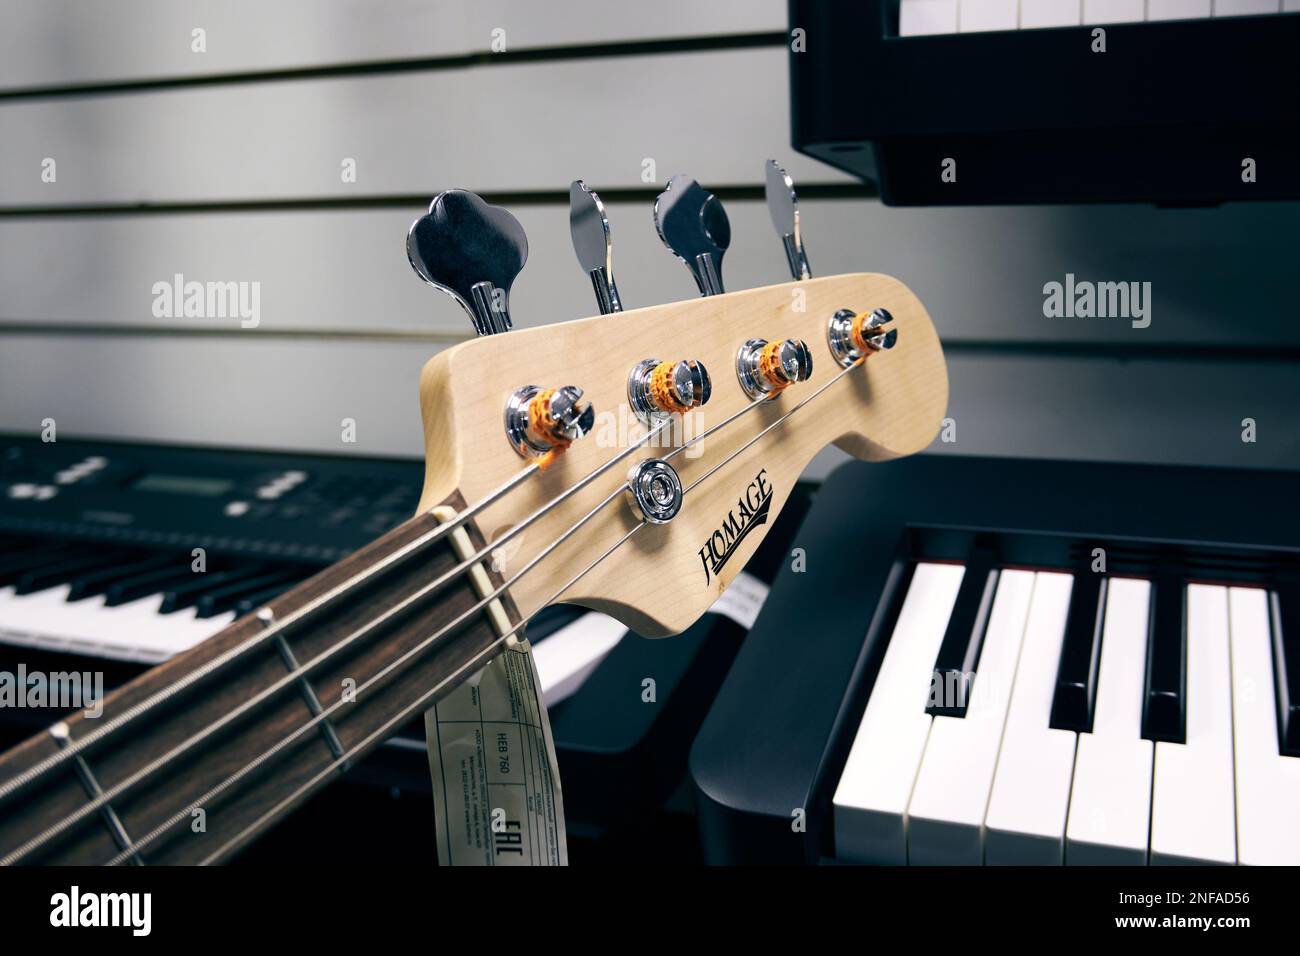 Bass guitar head against the background of musical digital synthesizers Stock Photo